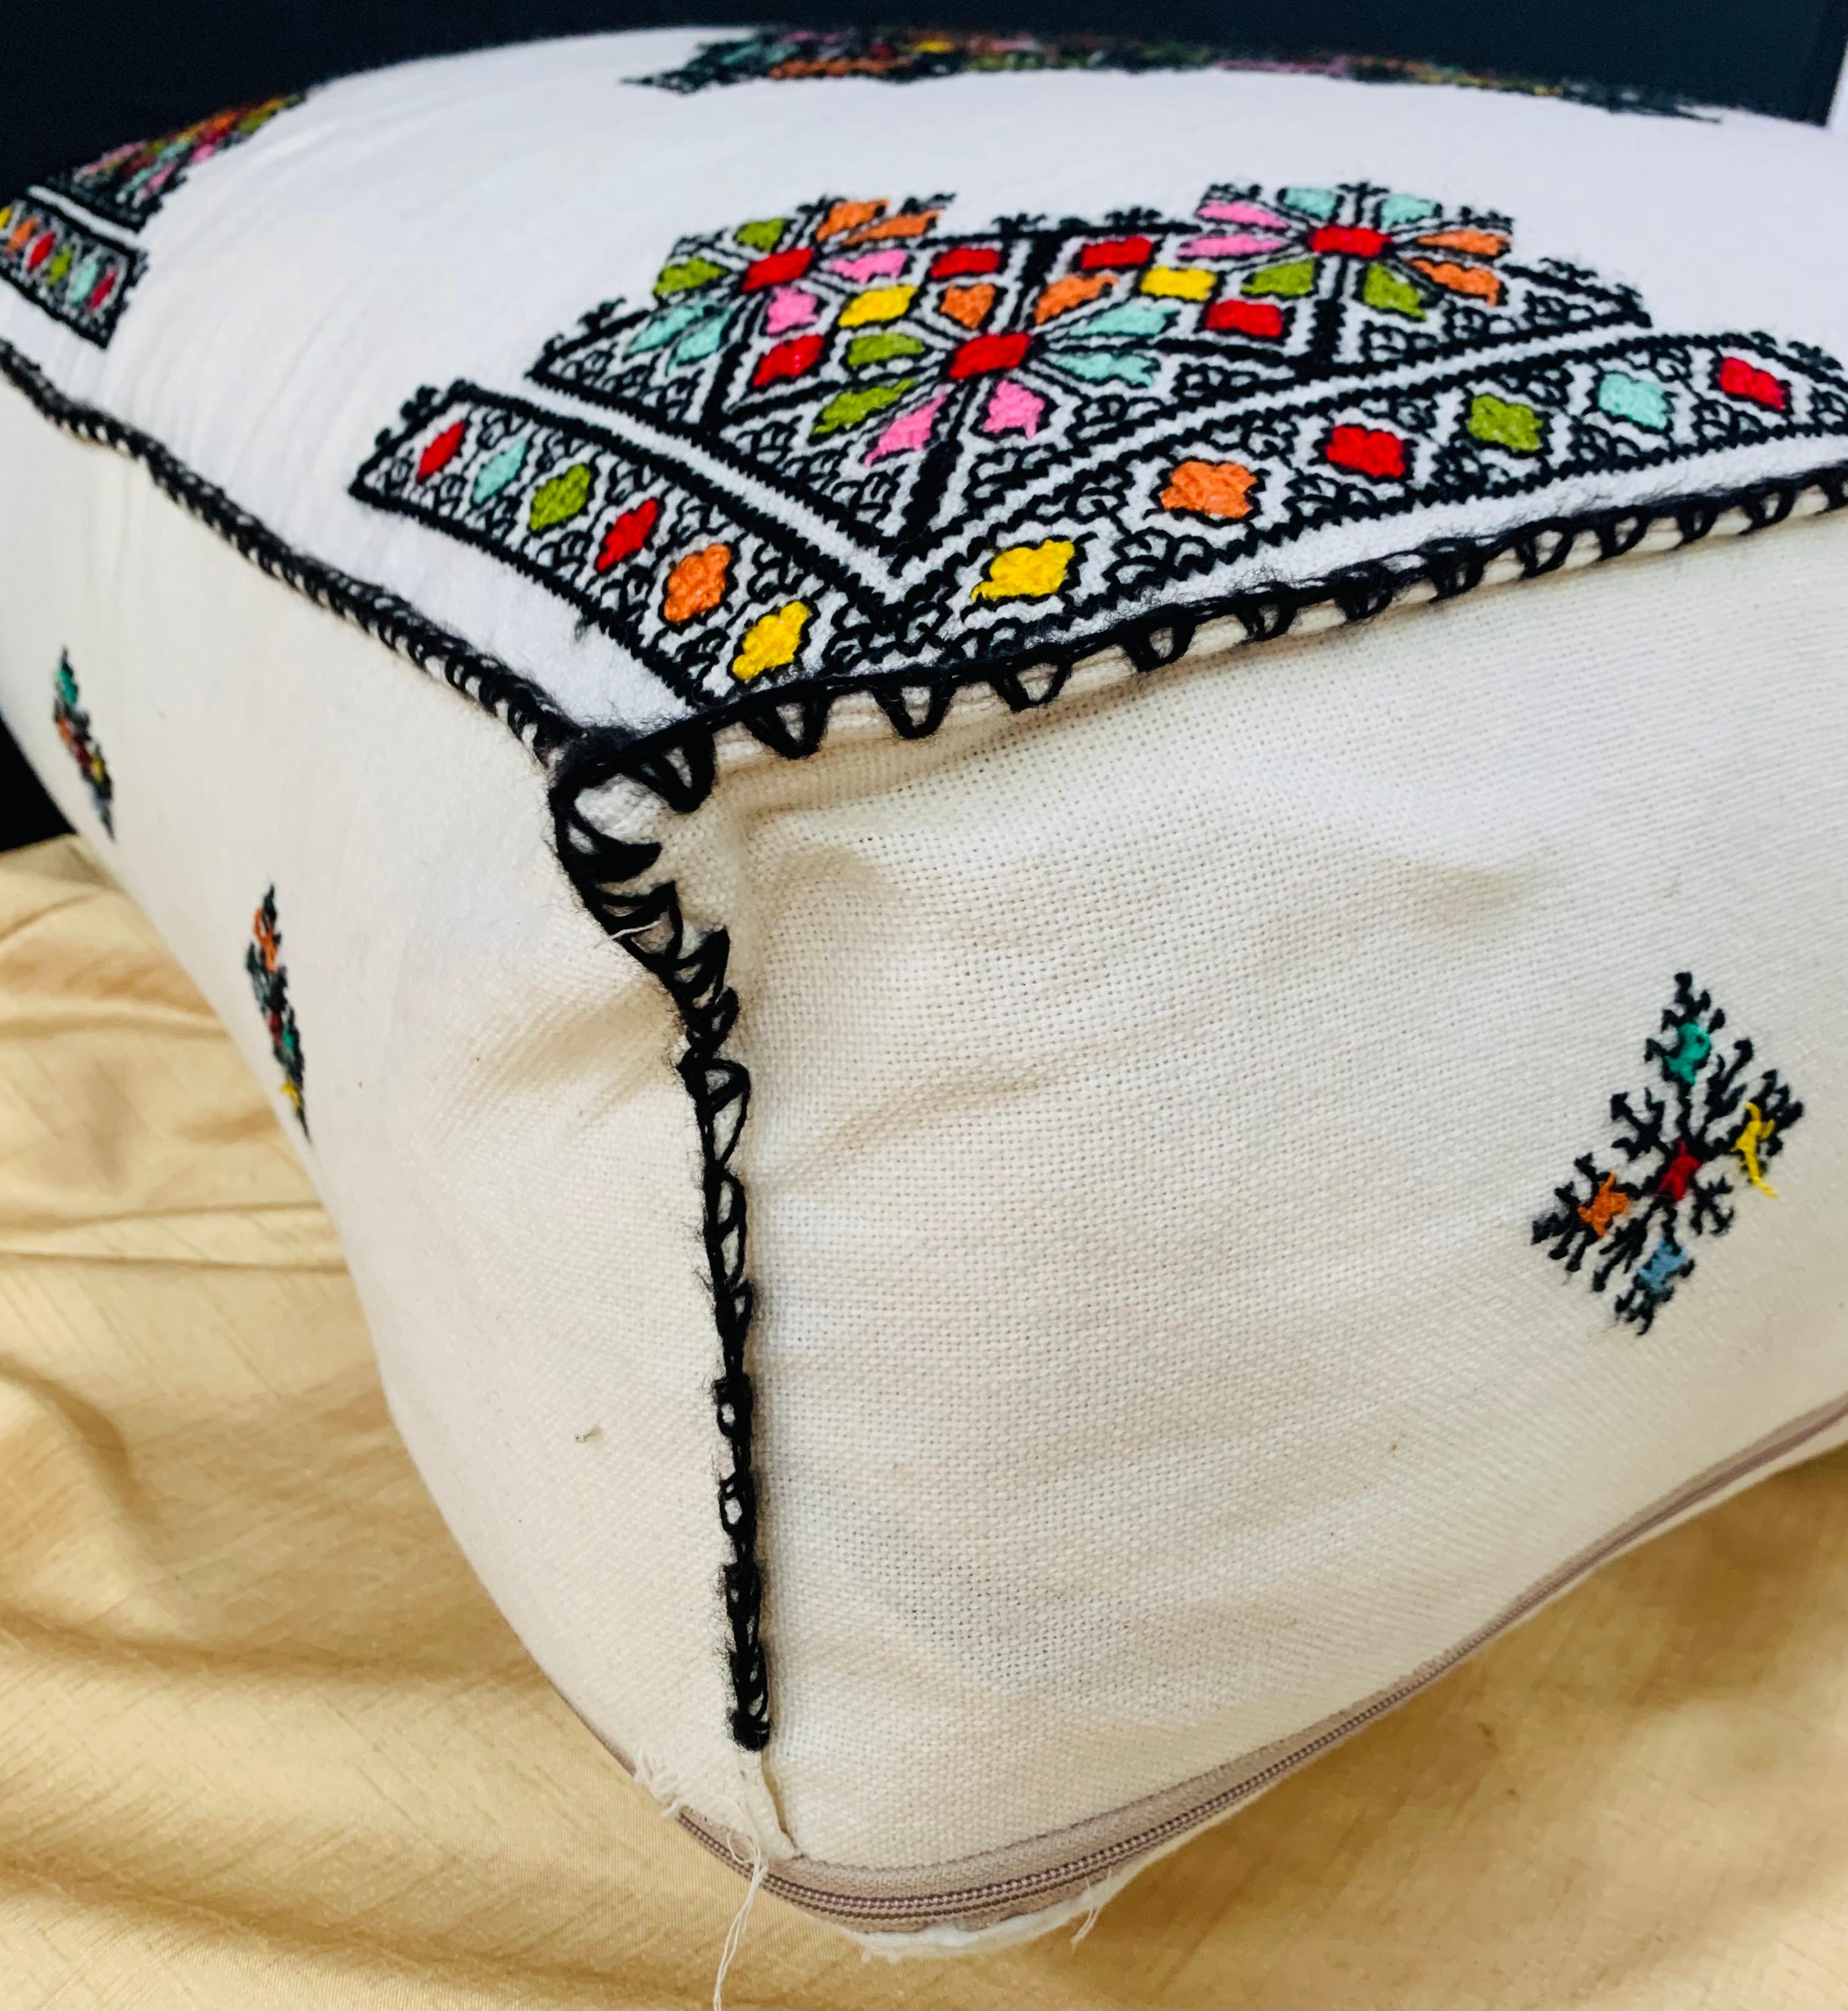 Moorish Large White Moroccan Hand Embroidered Ottoman, Cushion or Pouf For Sale